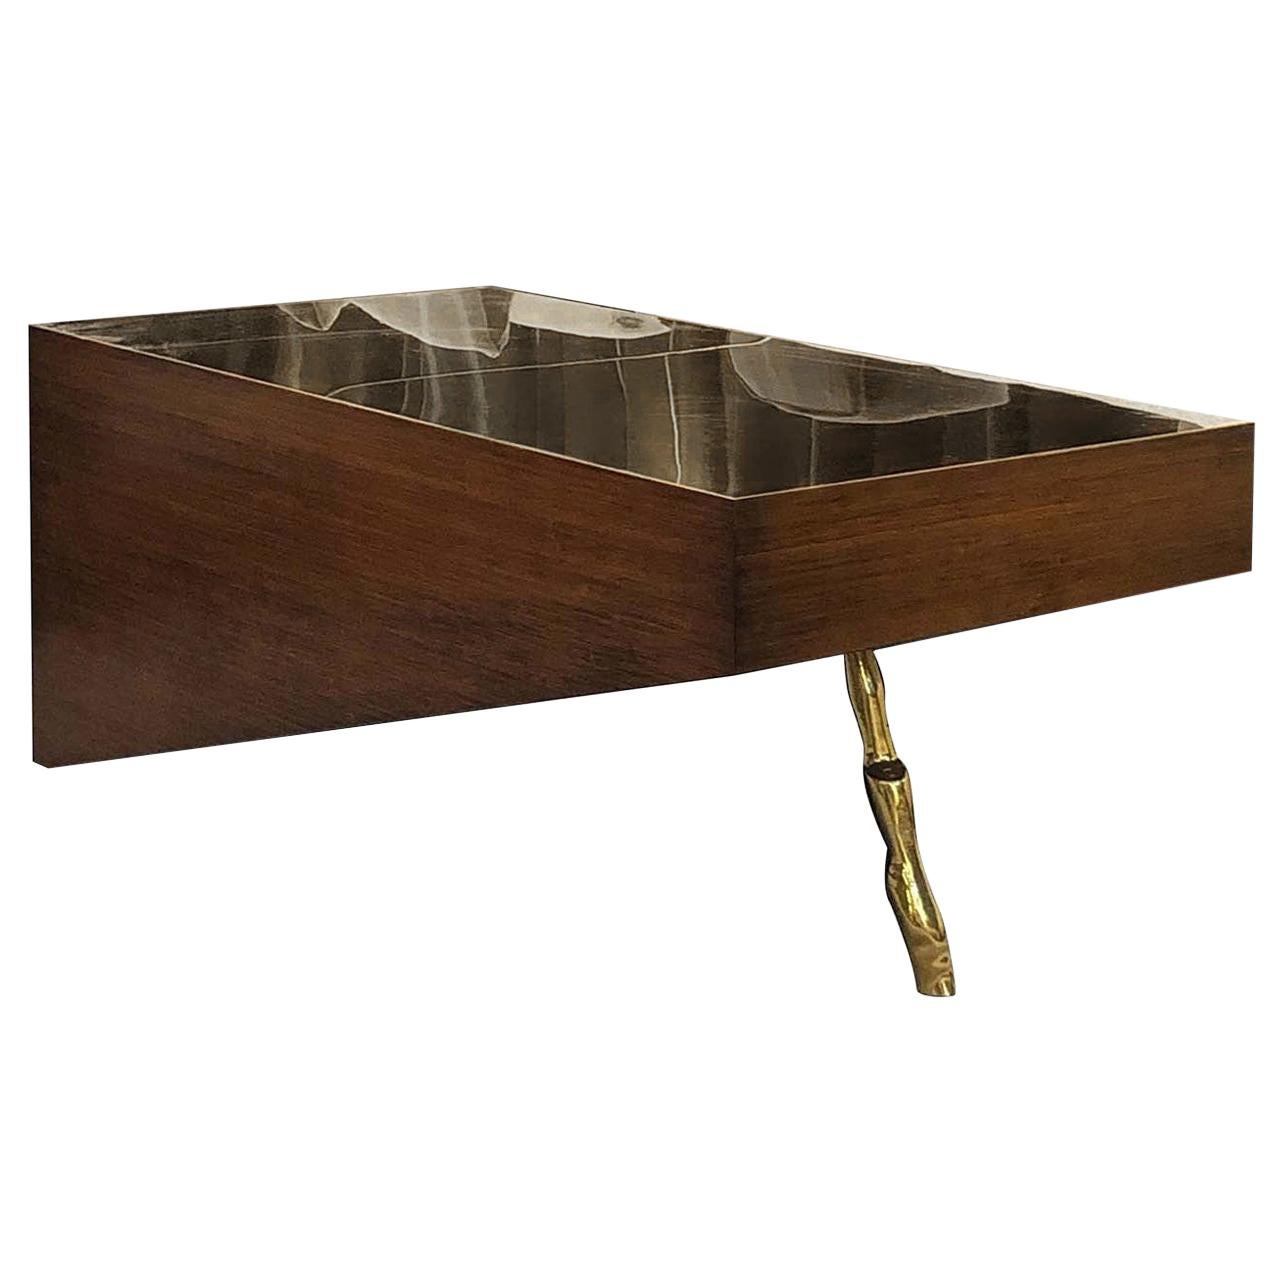 D/Zen Rectangular Coffee Table Gold and Brown by CTRLZAK